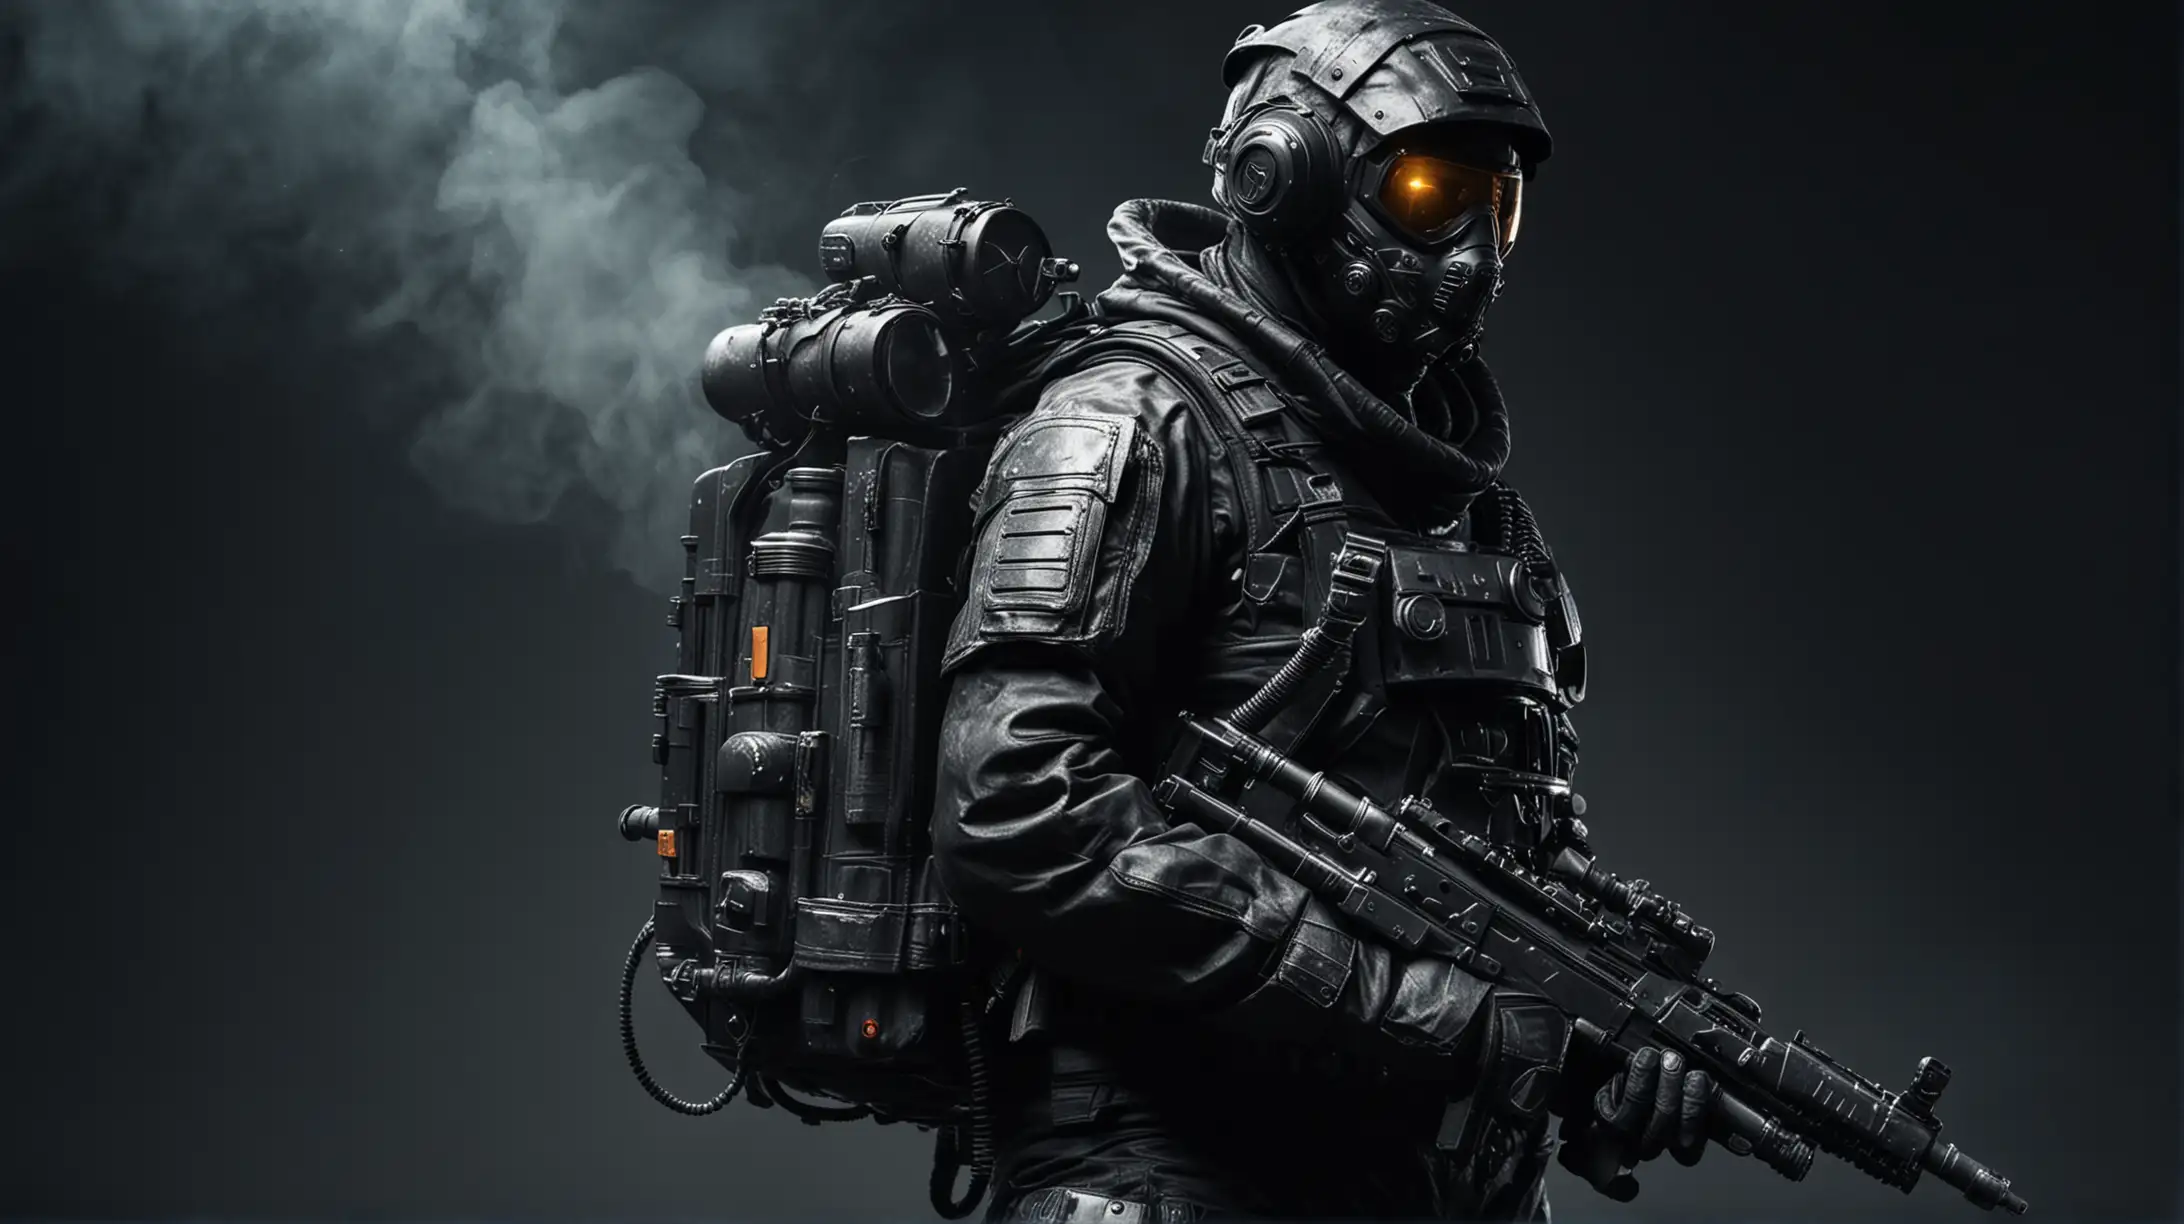 A dark sci-fi soldier in a sealed environment suit with an autogun and air tank backpack. Black, tight. Chemical protection suit.